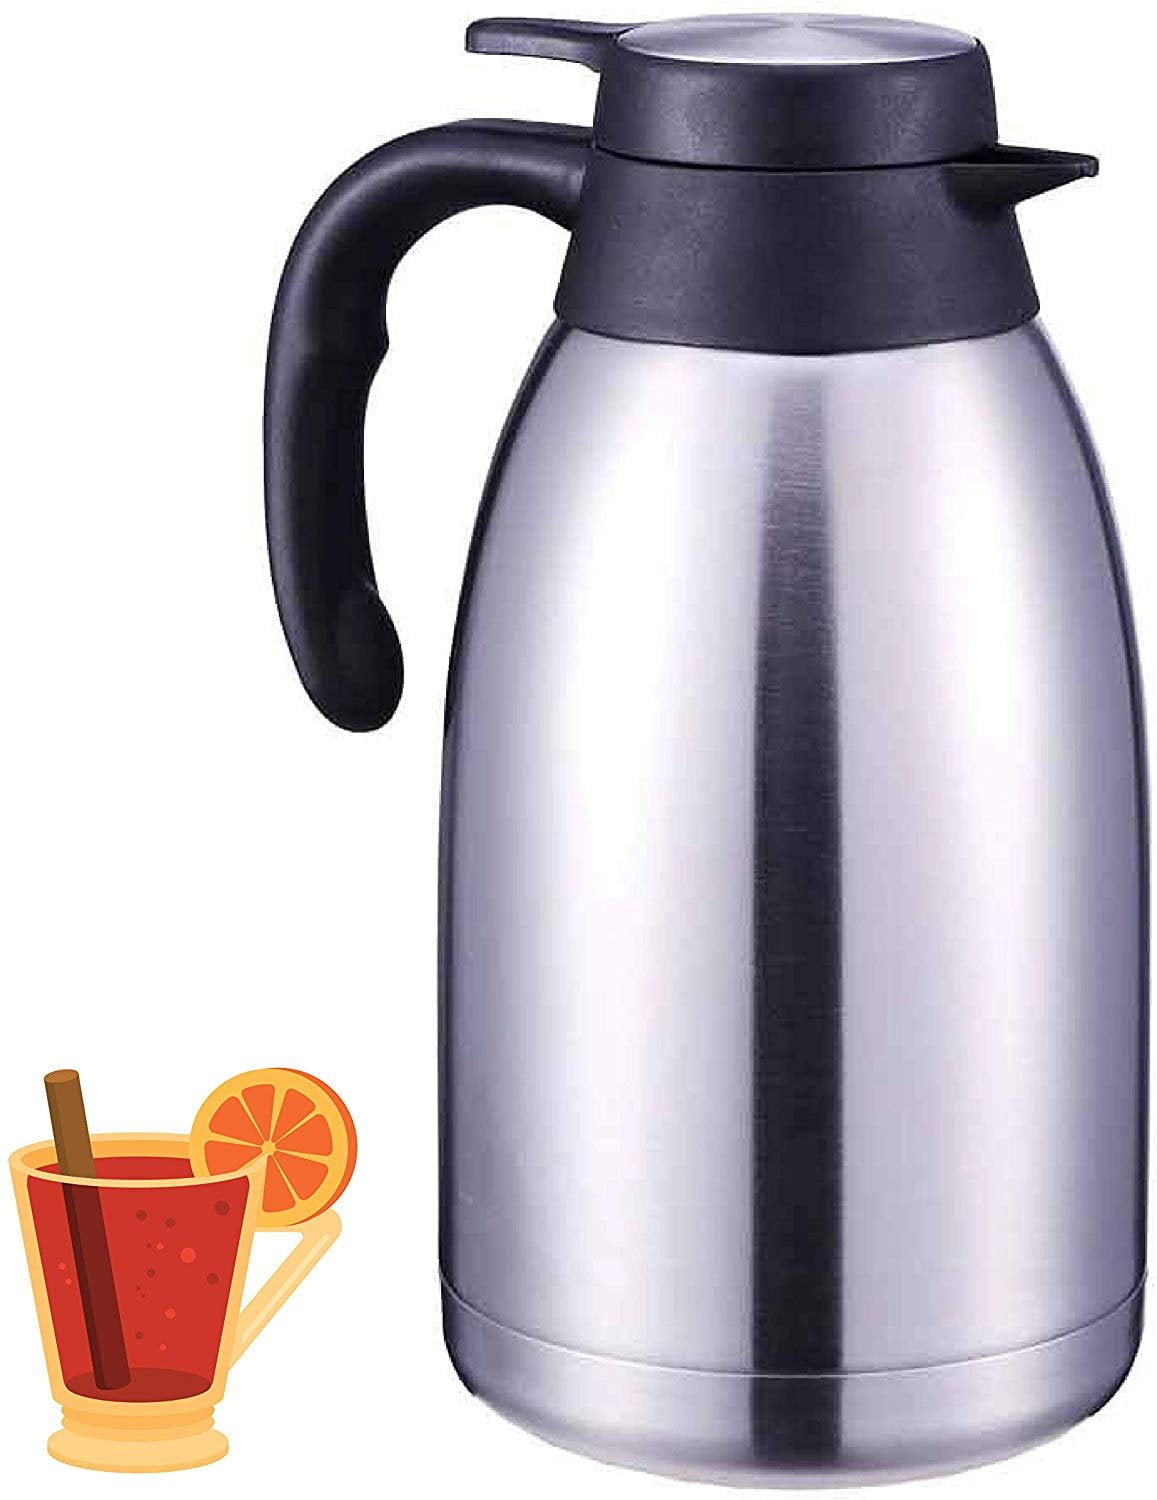 2L Stainless Steel Double-Wall Teapot Pot Insulated Coffee Carafe Silver 